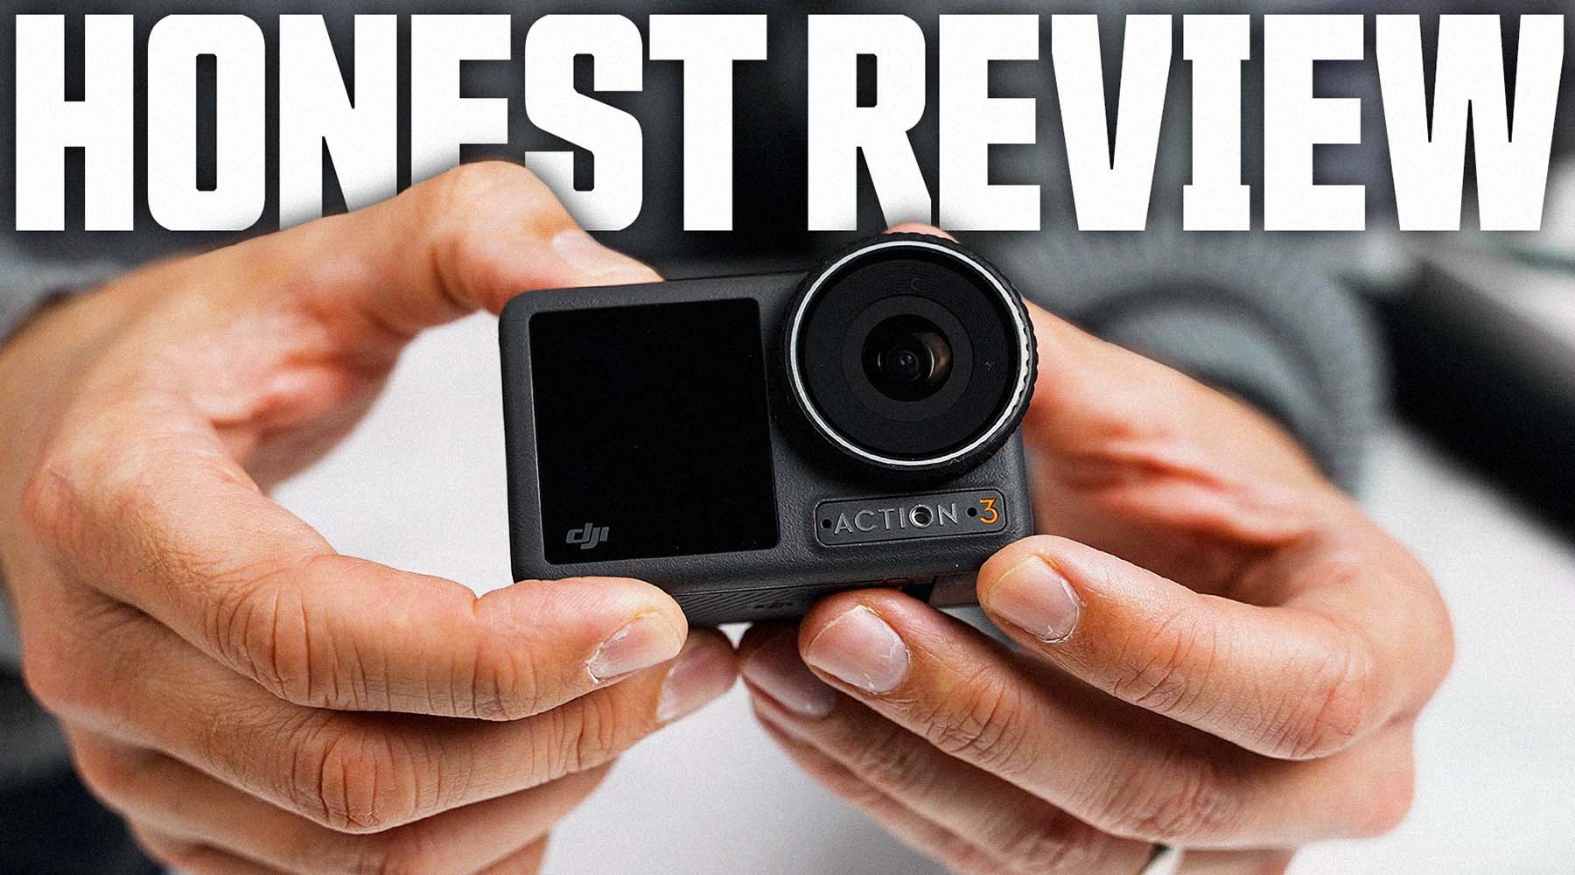 Is DJI OSMO Action 3 the BEST Action Camera? - Editors Keys